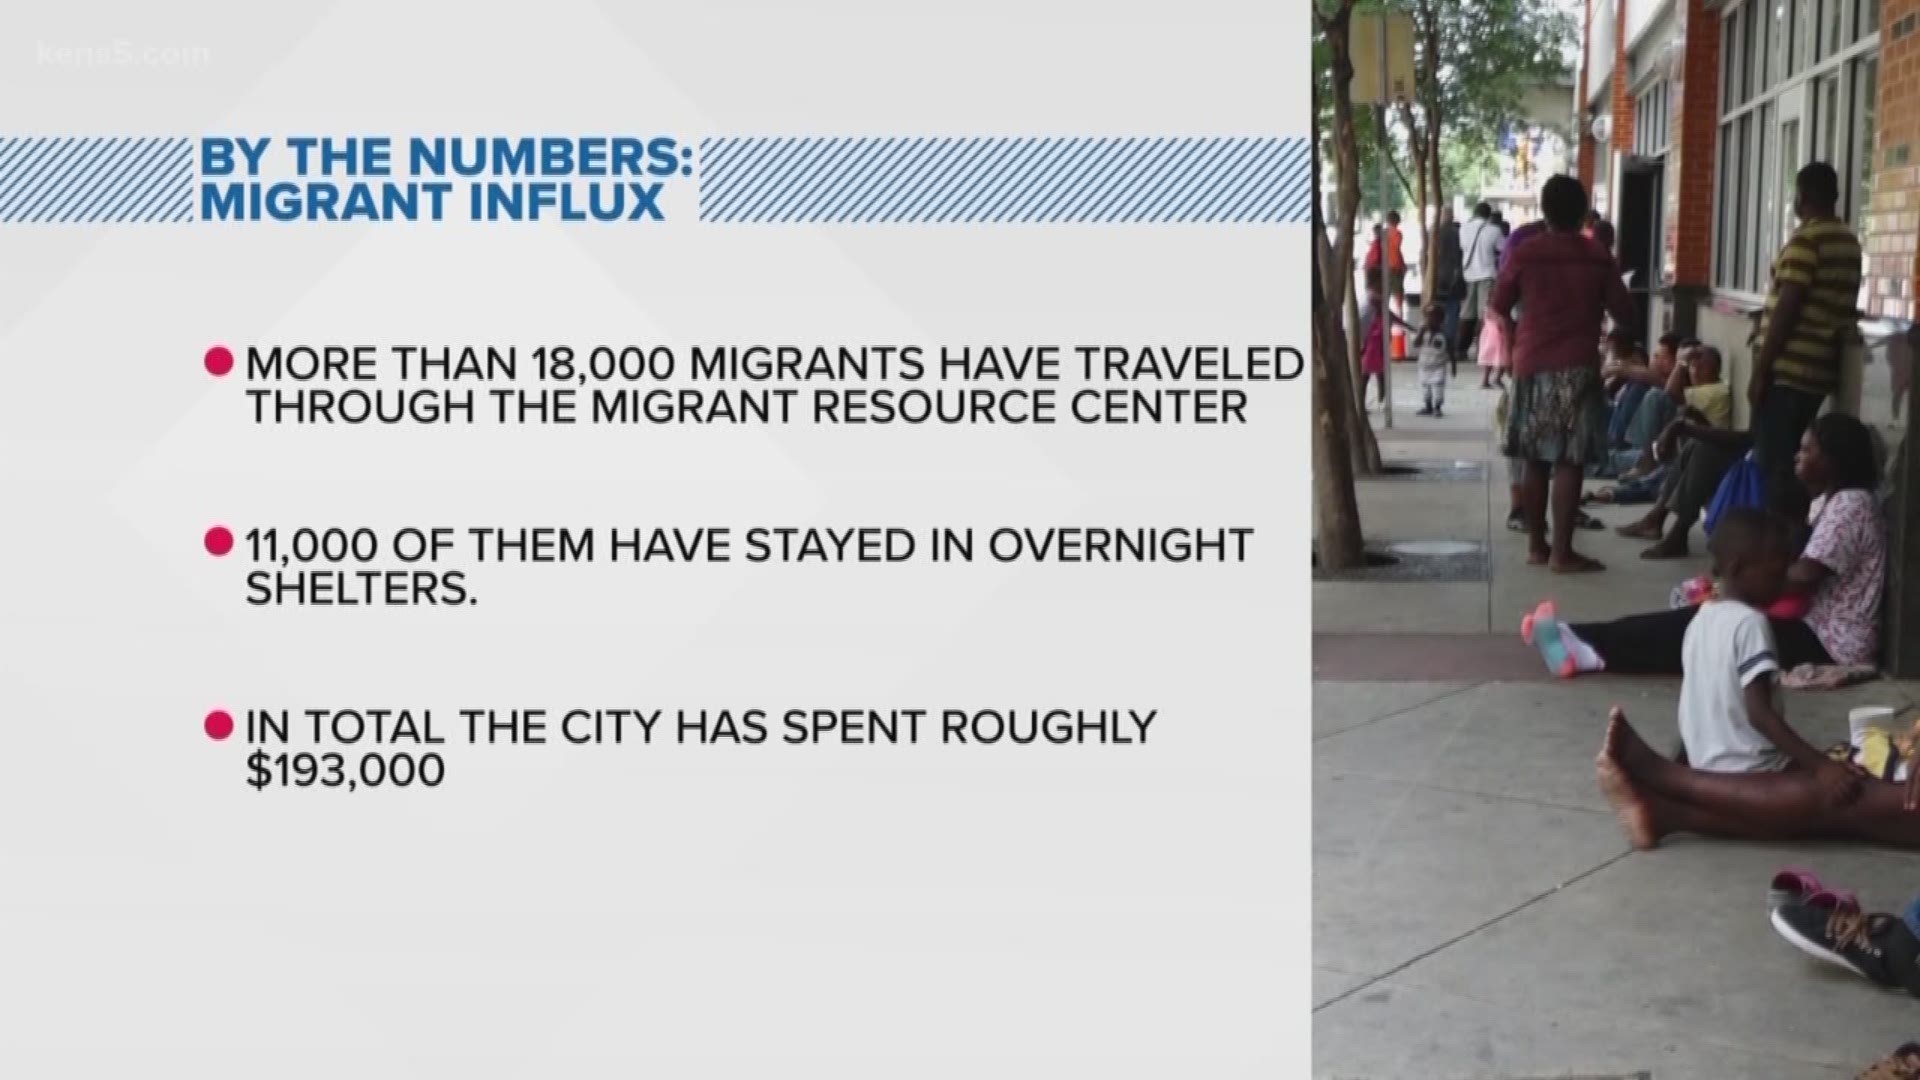 More than $600,000 and counting. That's how much has been spent in San Antonio by groups responding to the thousands of asylum seekers venturing through - but how much is that costing you?